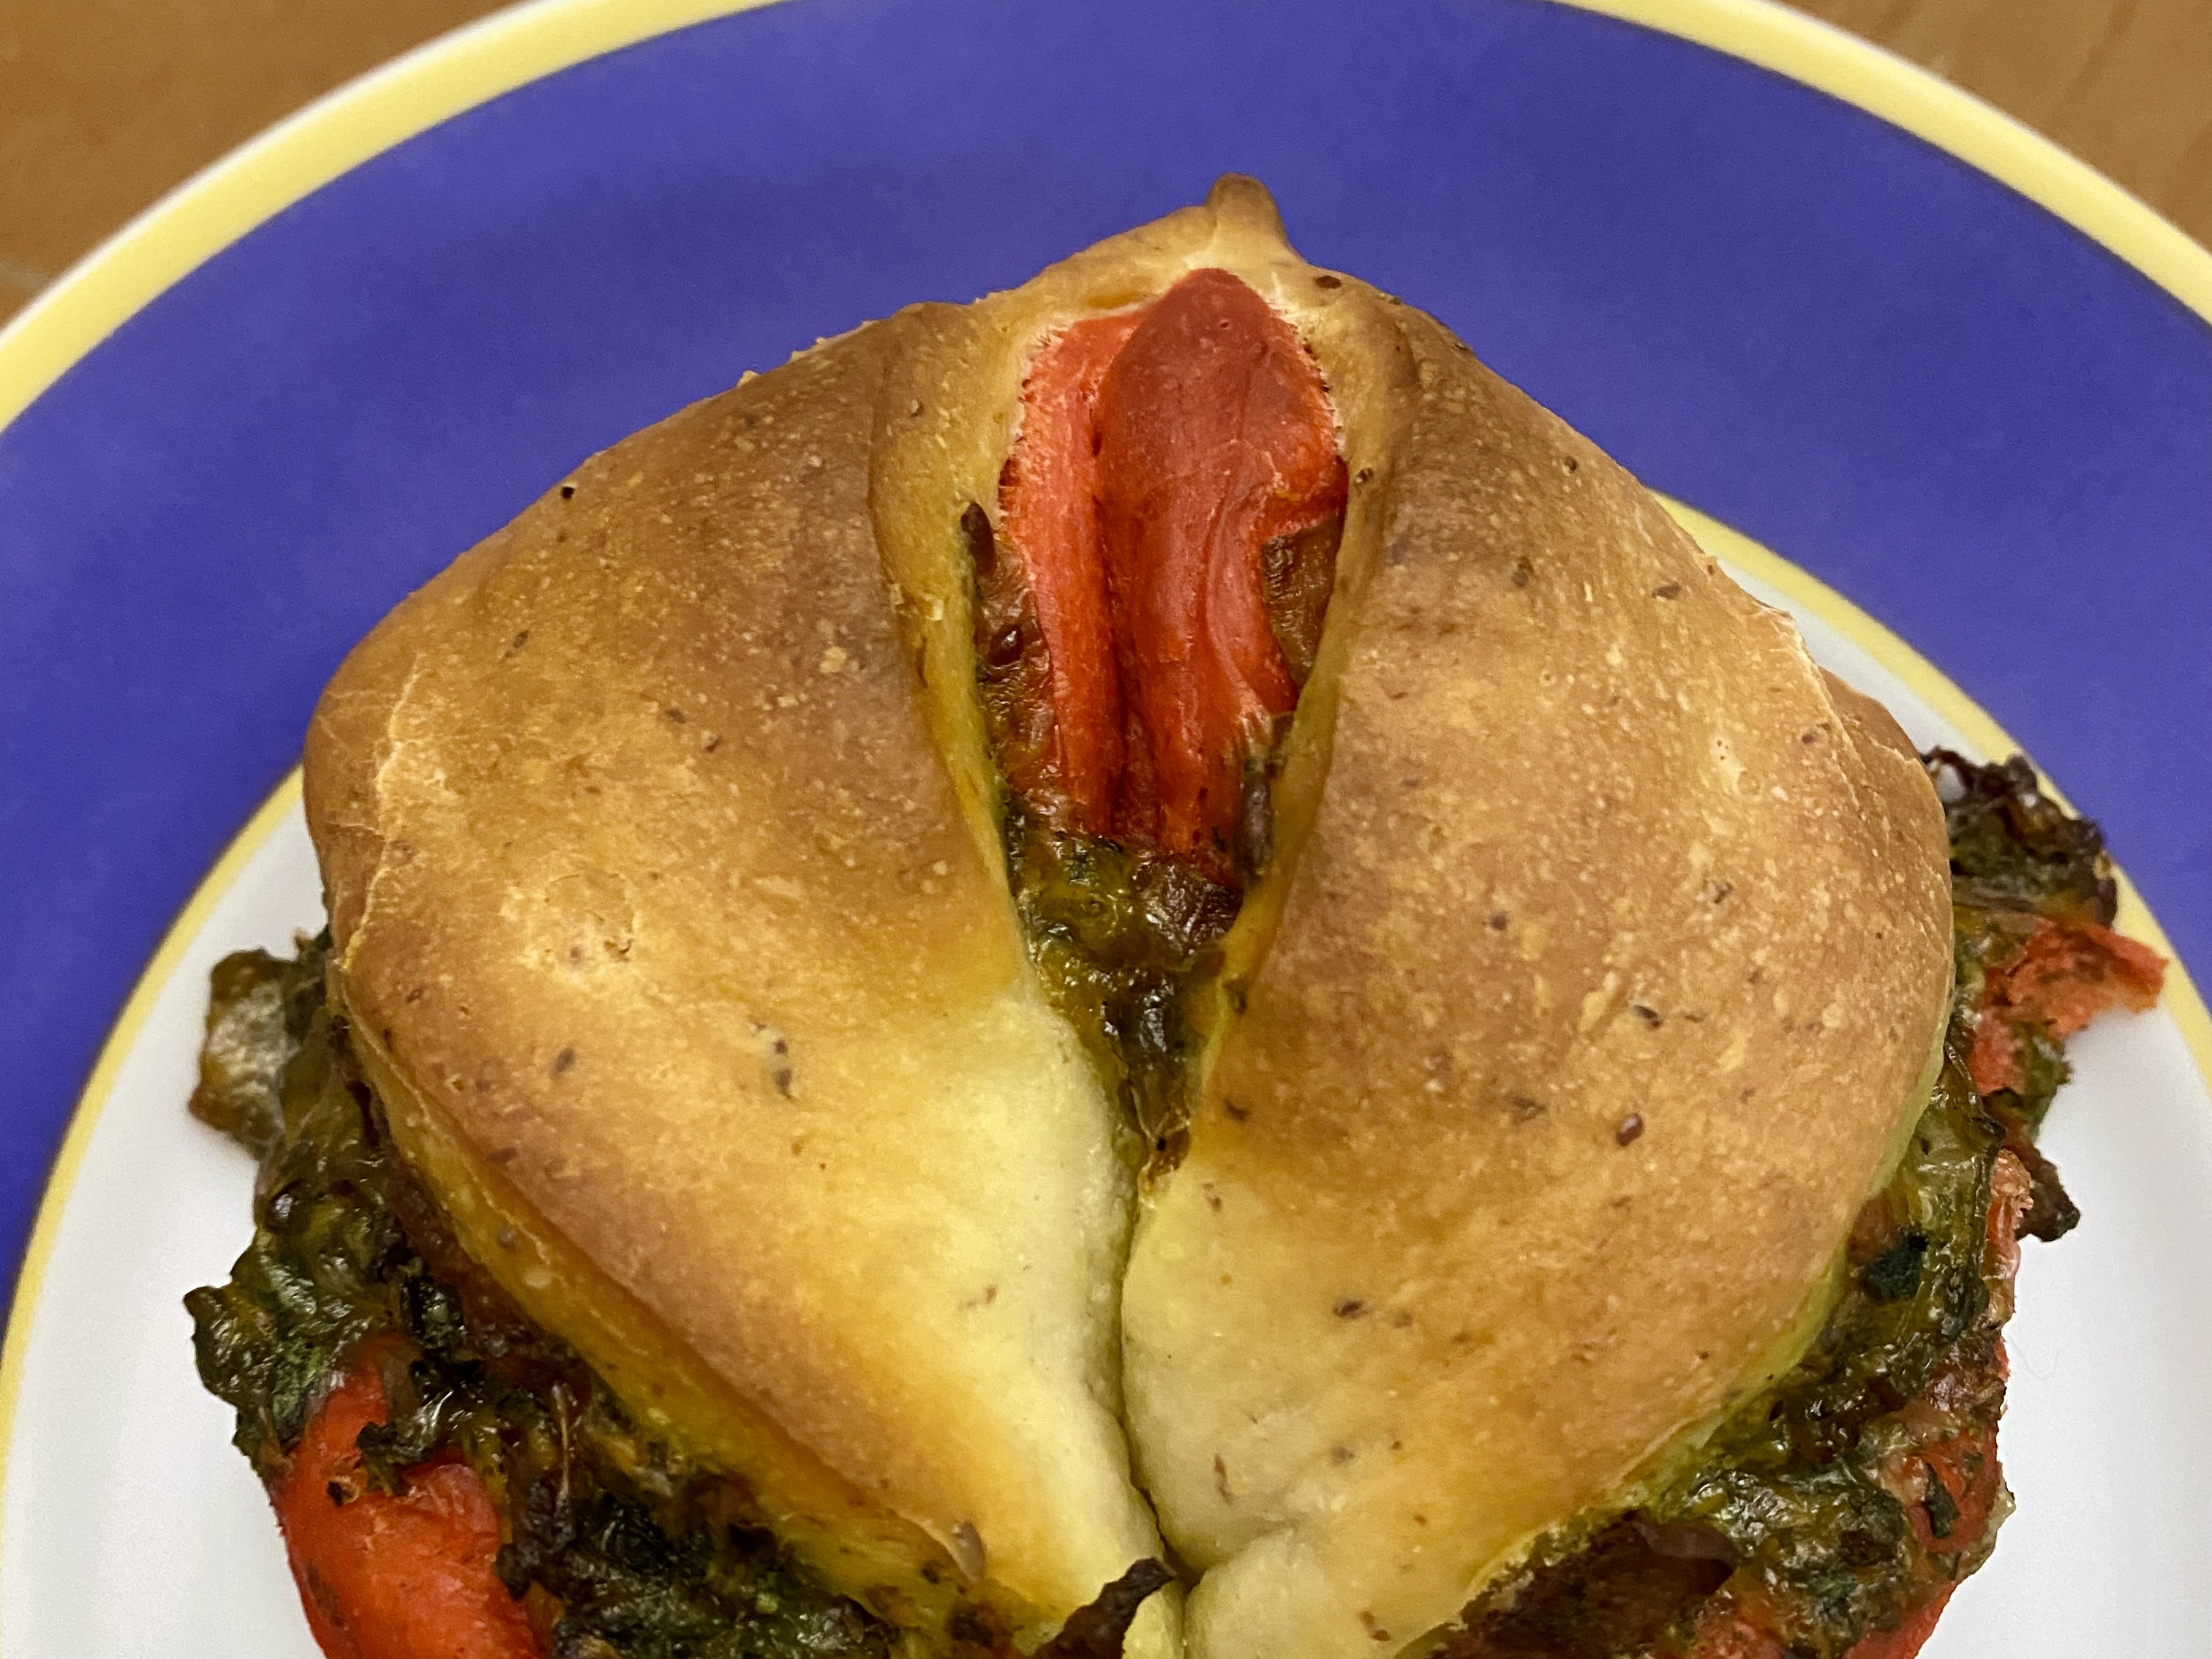 Twisted bread made with a layer of bright red dough and a layer of white dough with green pesto filling peeking through.